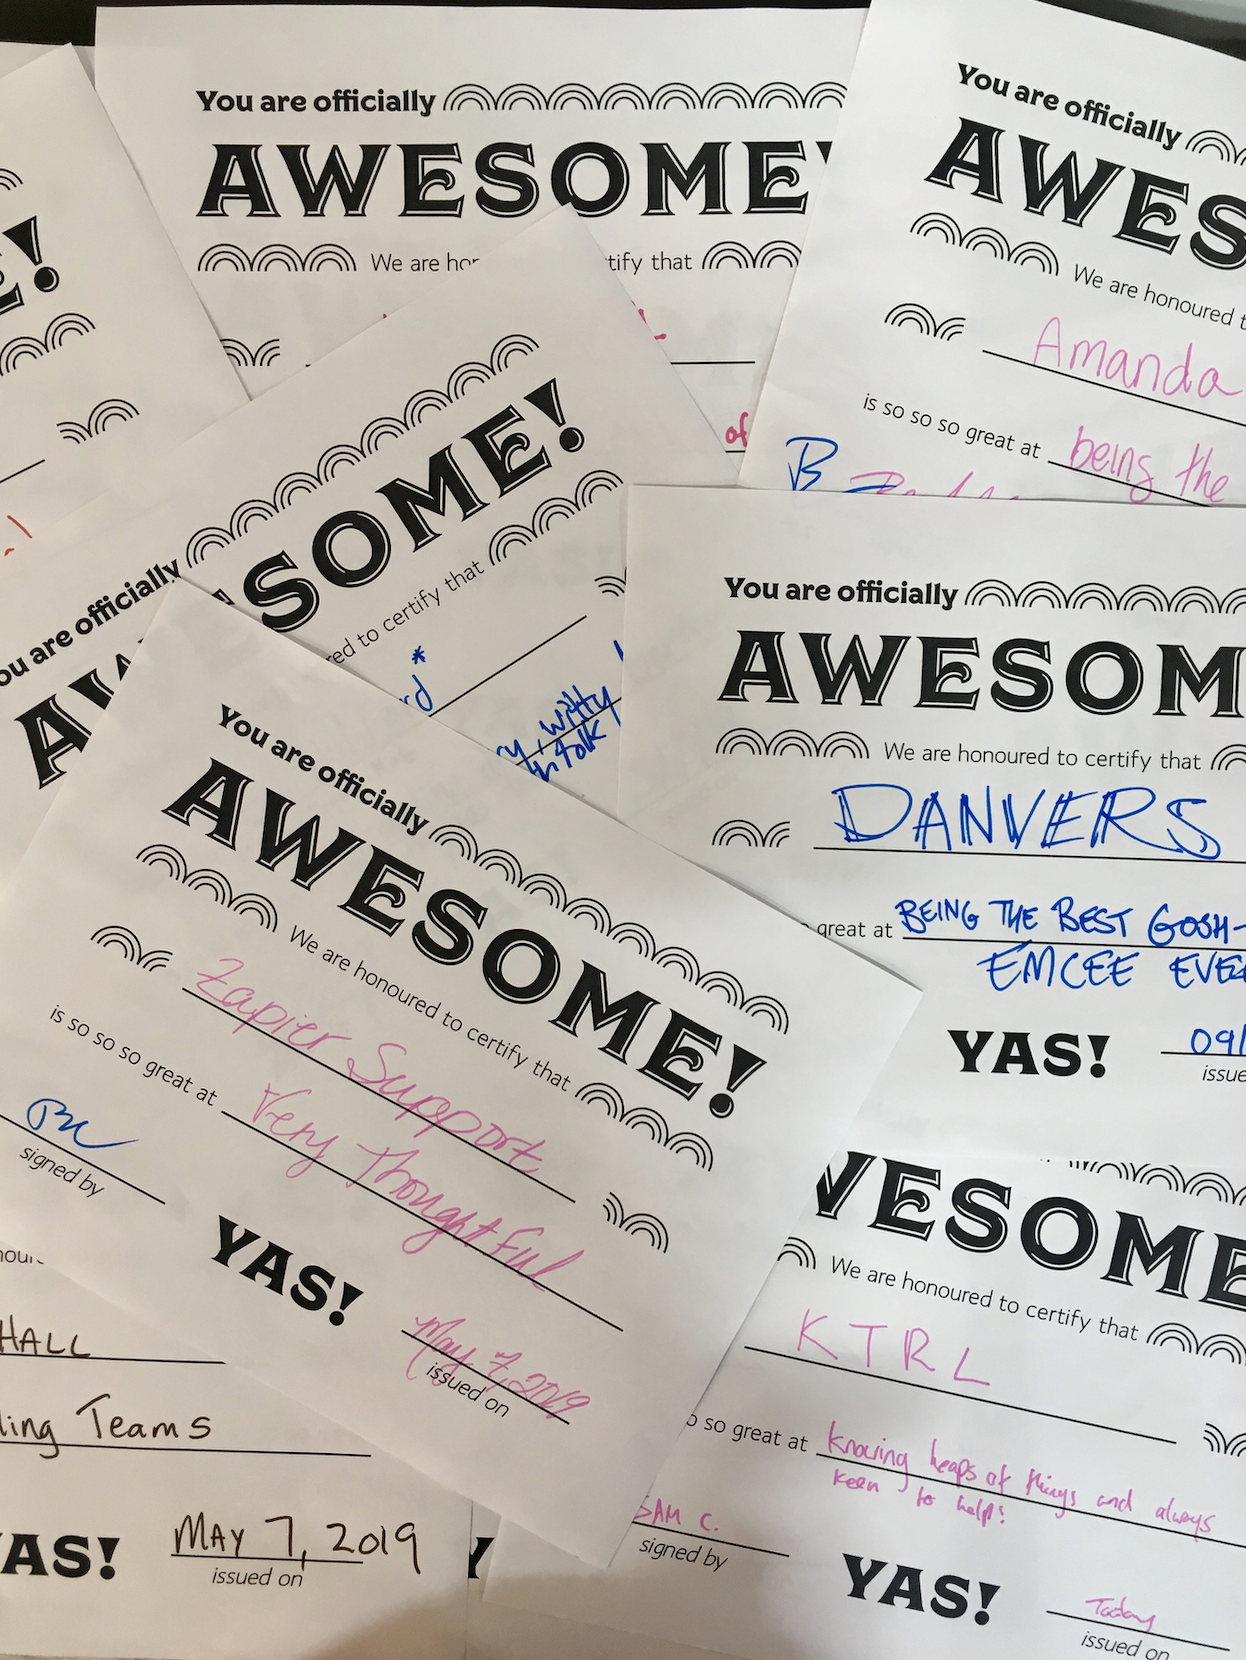 An image of the certificates of awesome